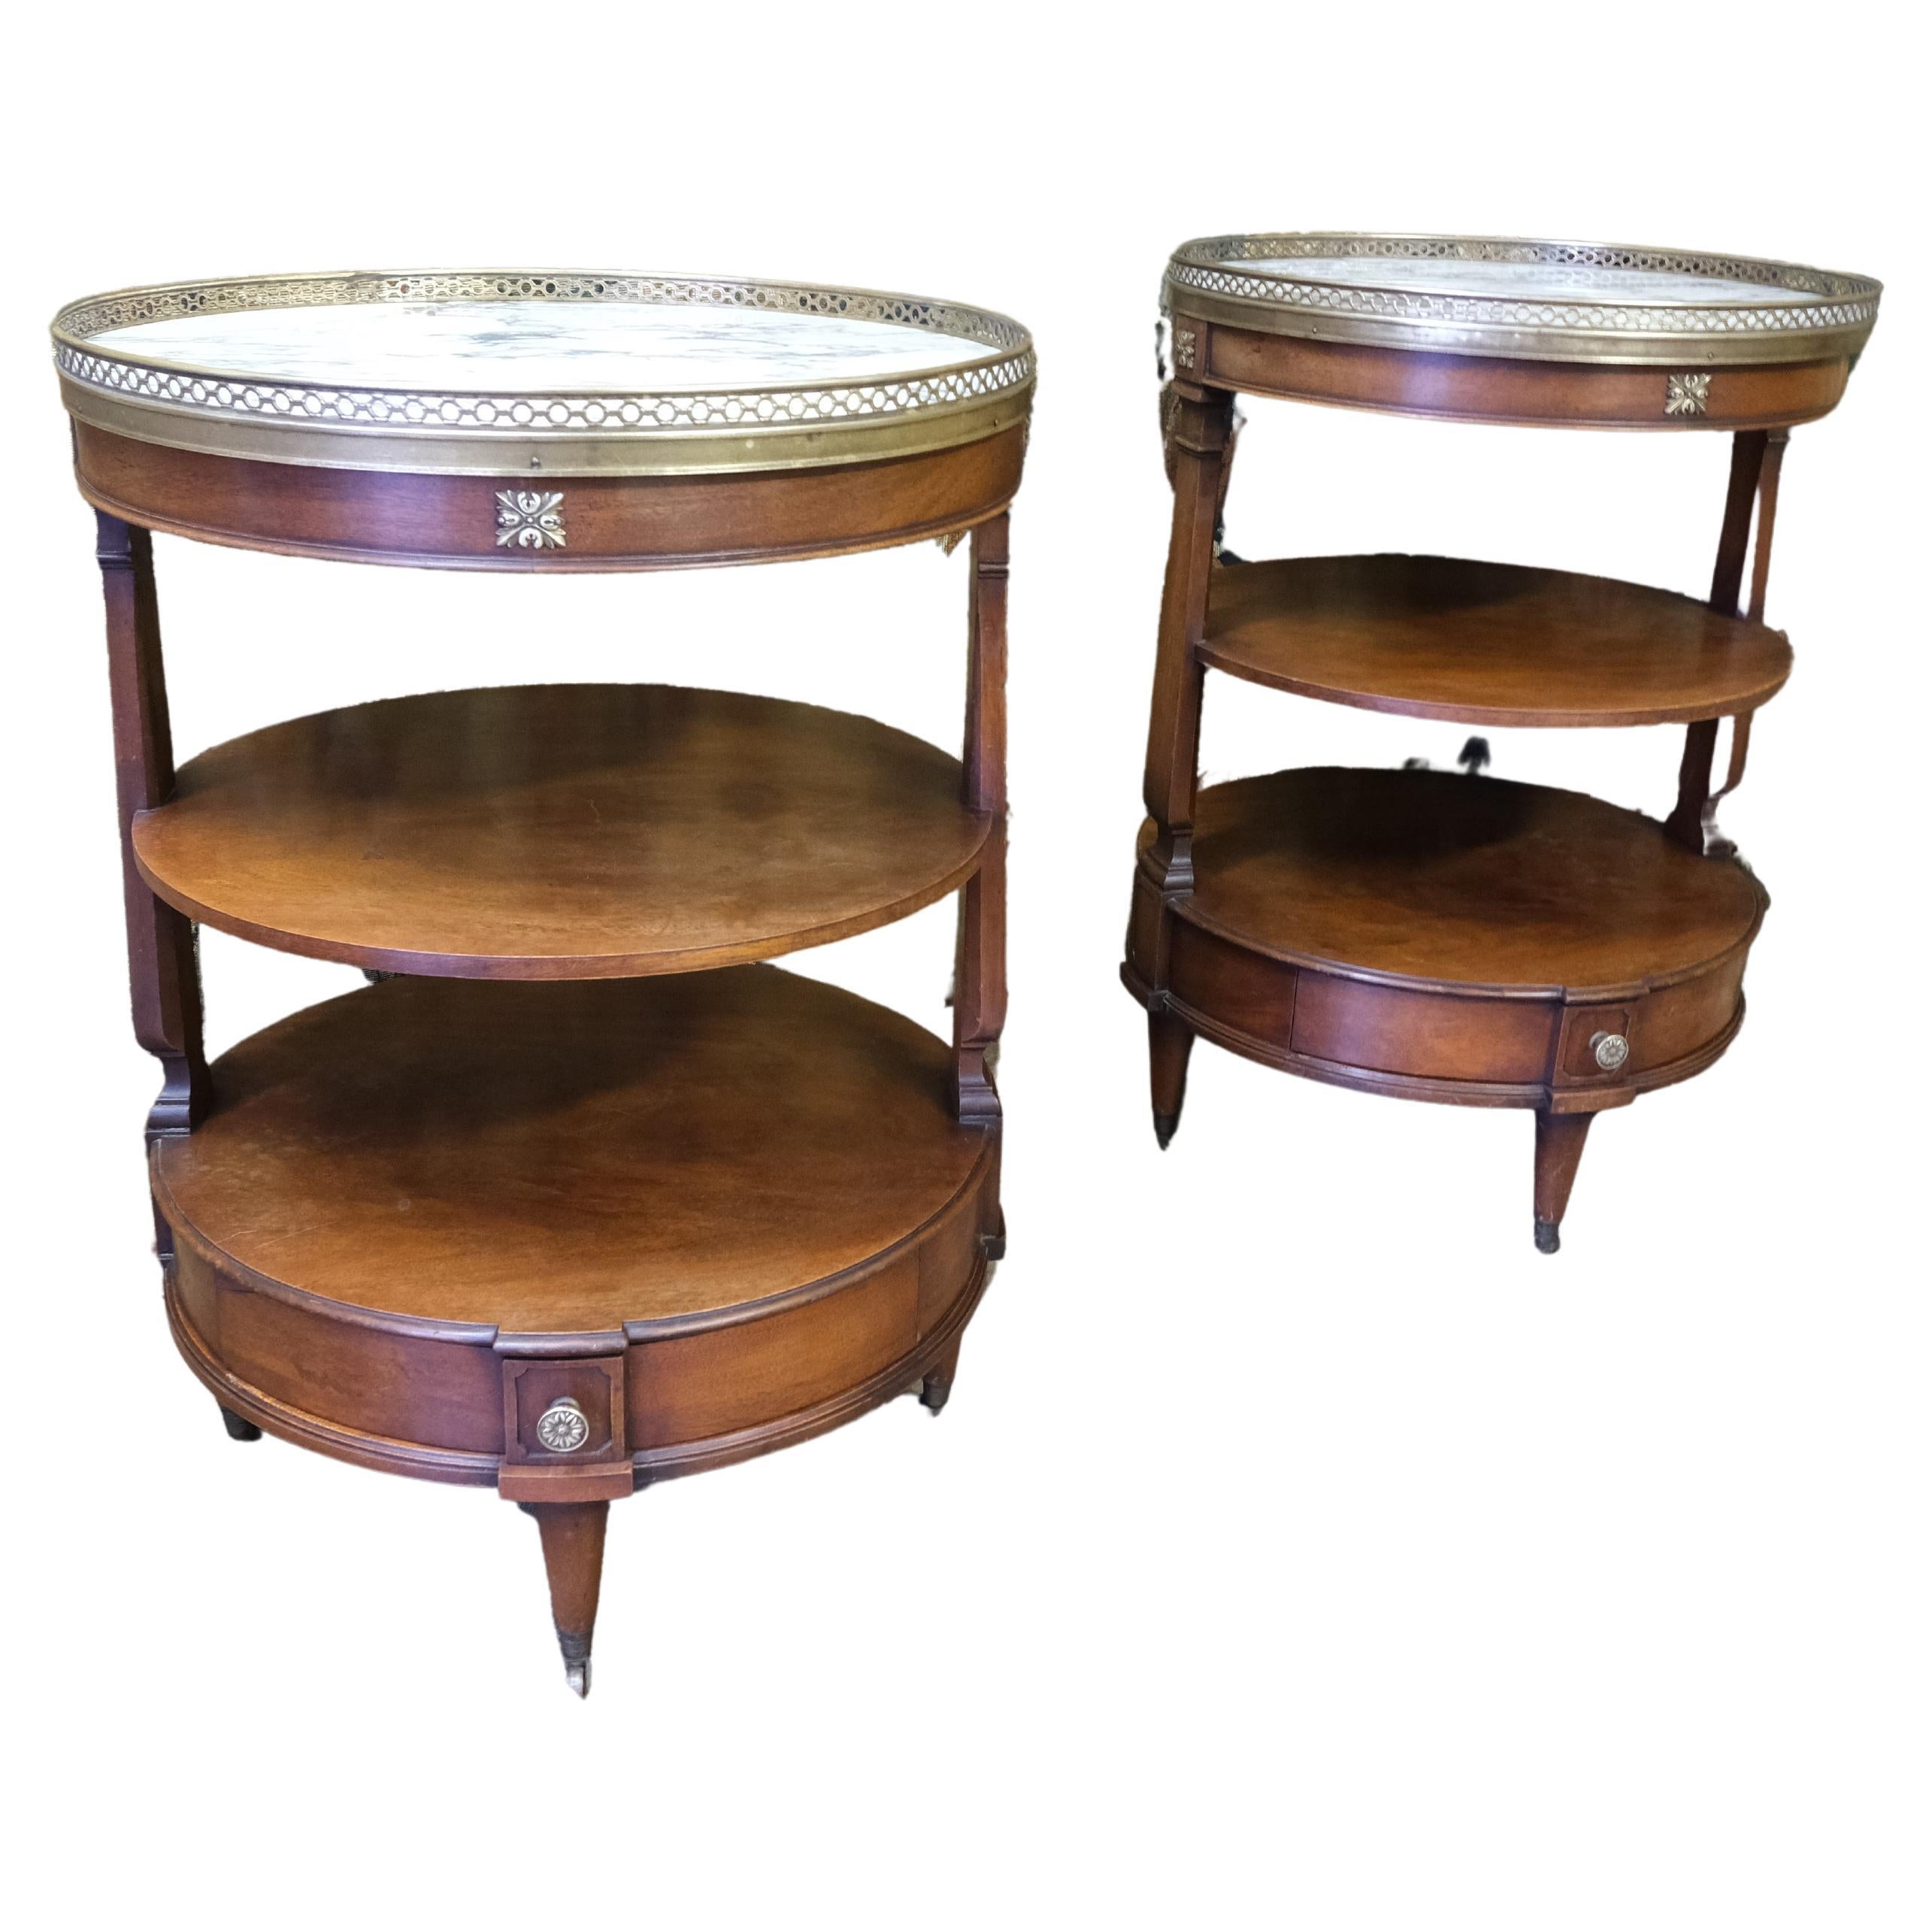 Pair of etagere tables